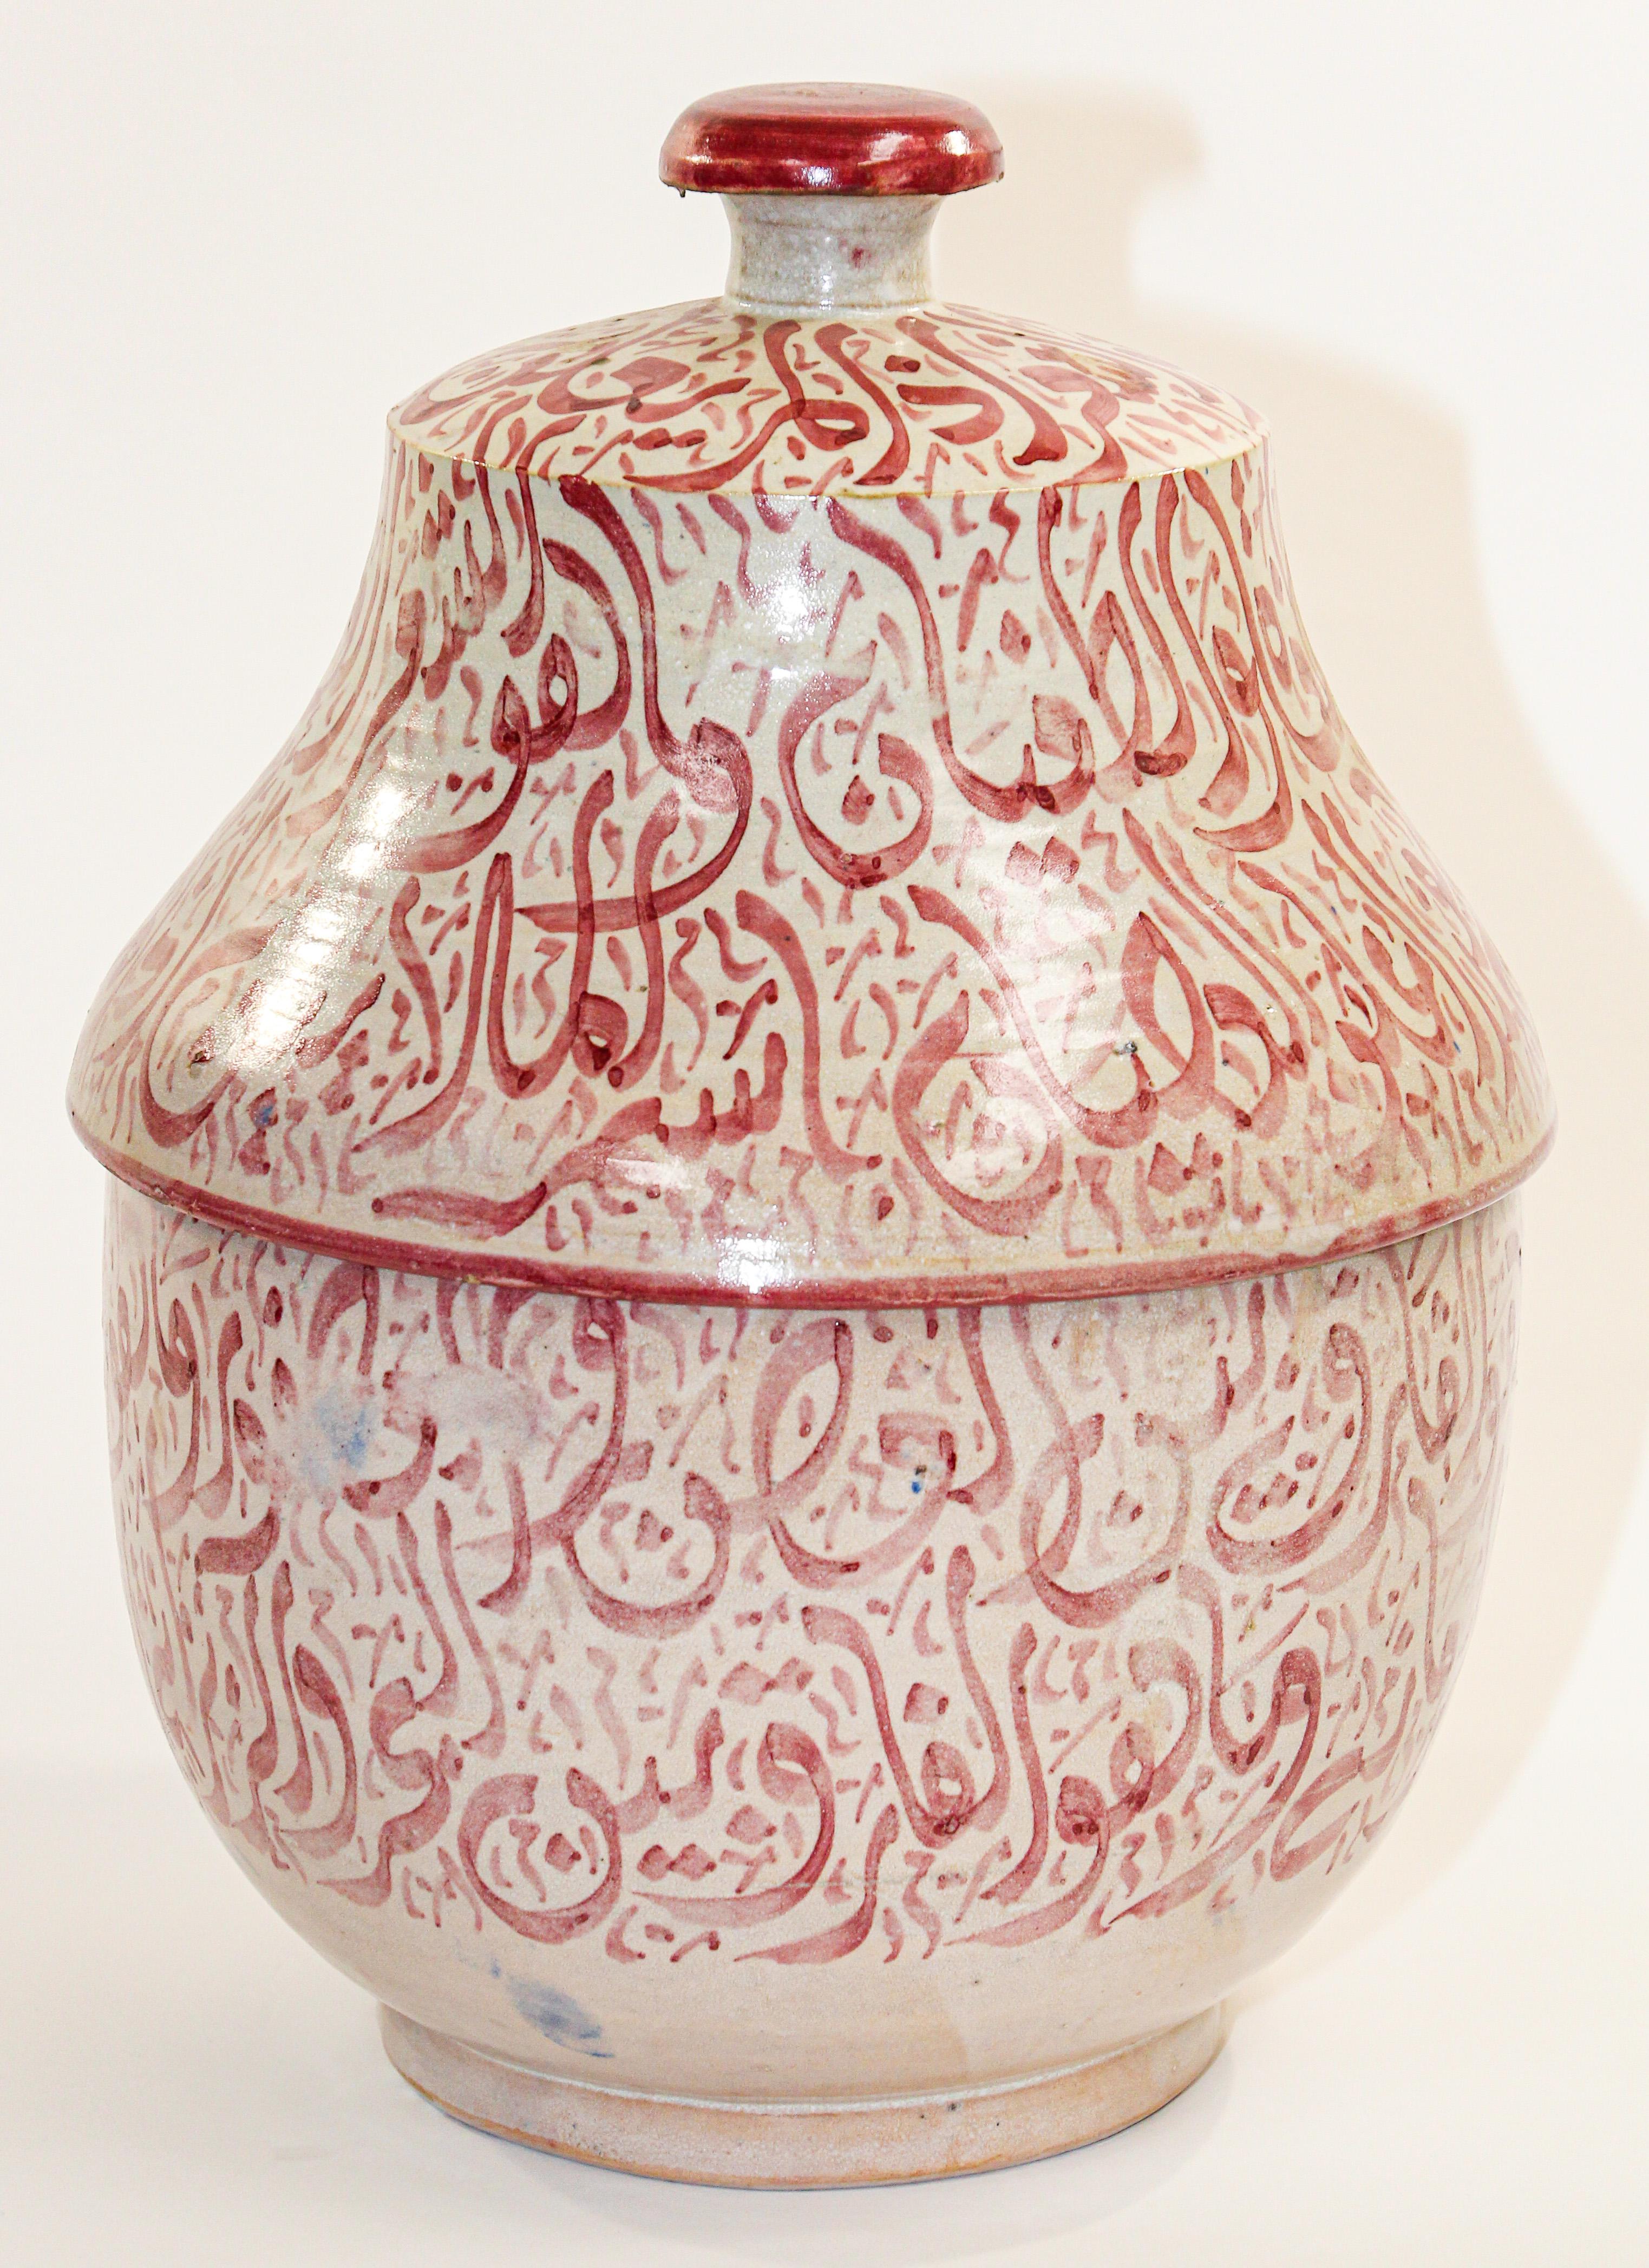 20th Century Moroccan Ceramic Lidded Urn from Fez with Arabic Calligraphy Pink Writing For Sale